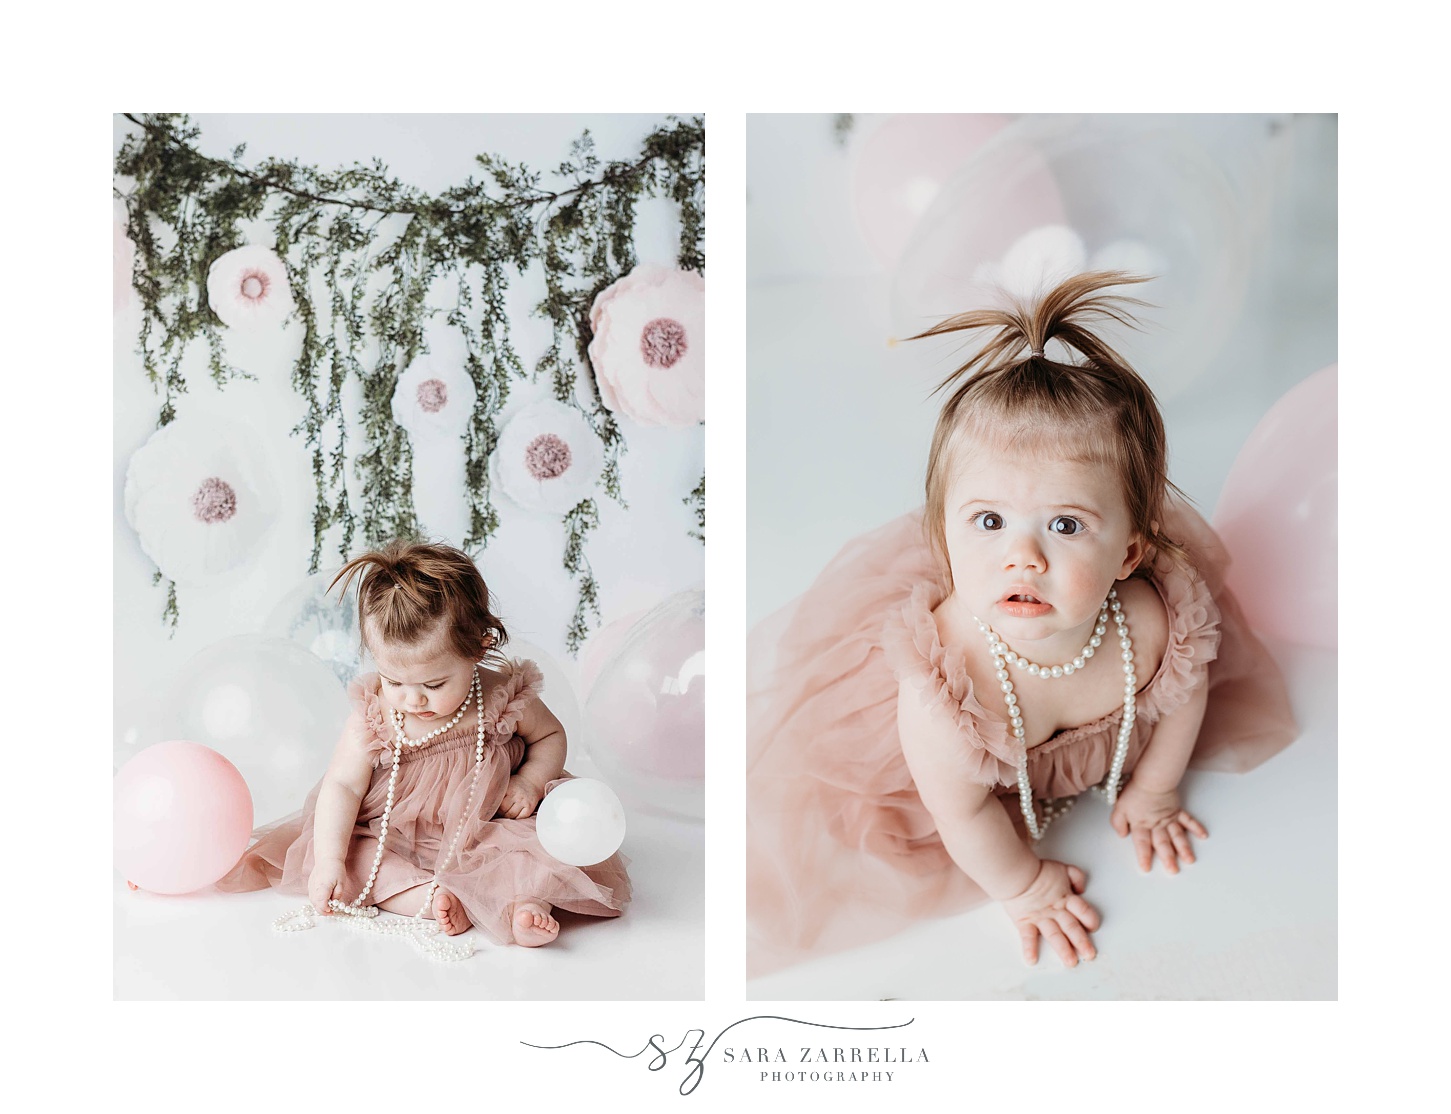 baby poses in front of pink balloons during Pastel Pink and White Cake Smash